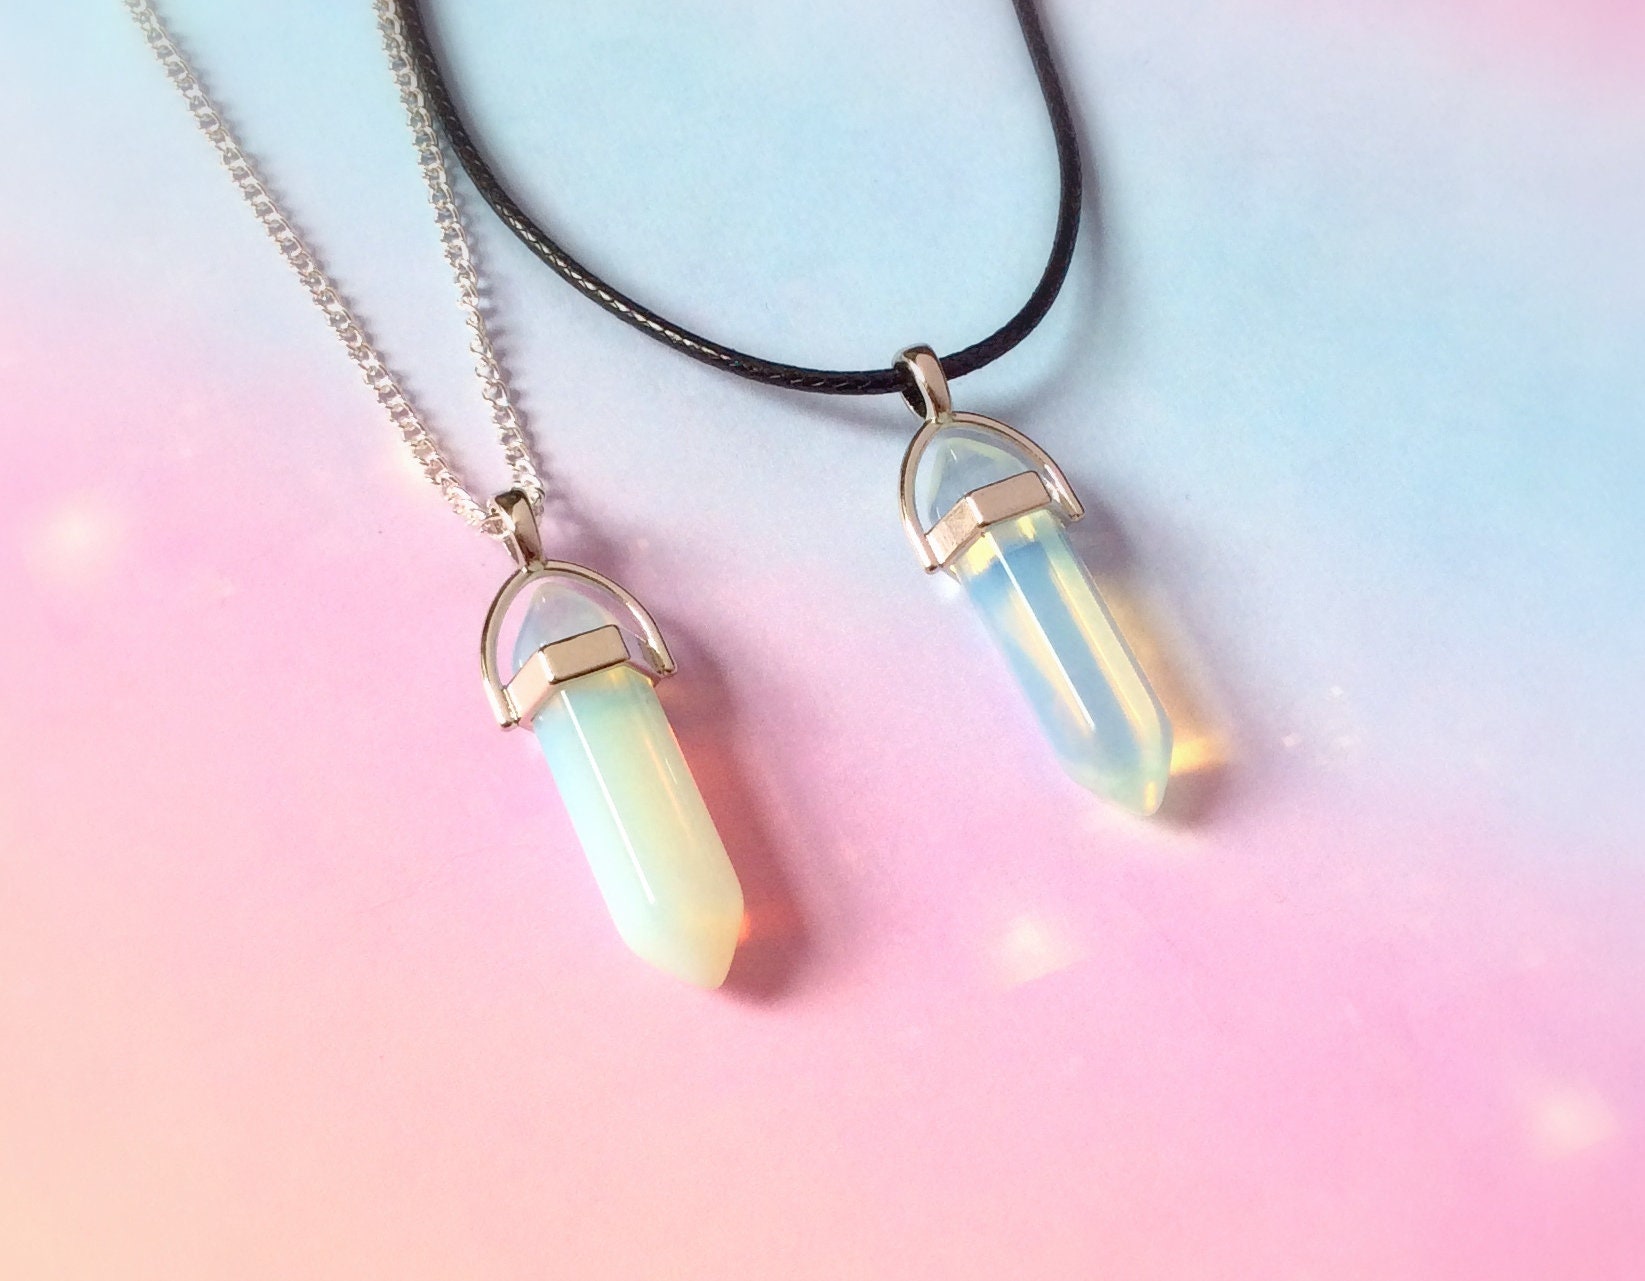 Stone/Crystal Holder Necklace with Opalite Crystal - Crystal Junkie